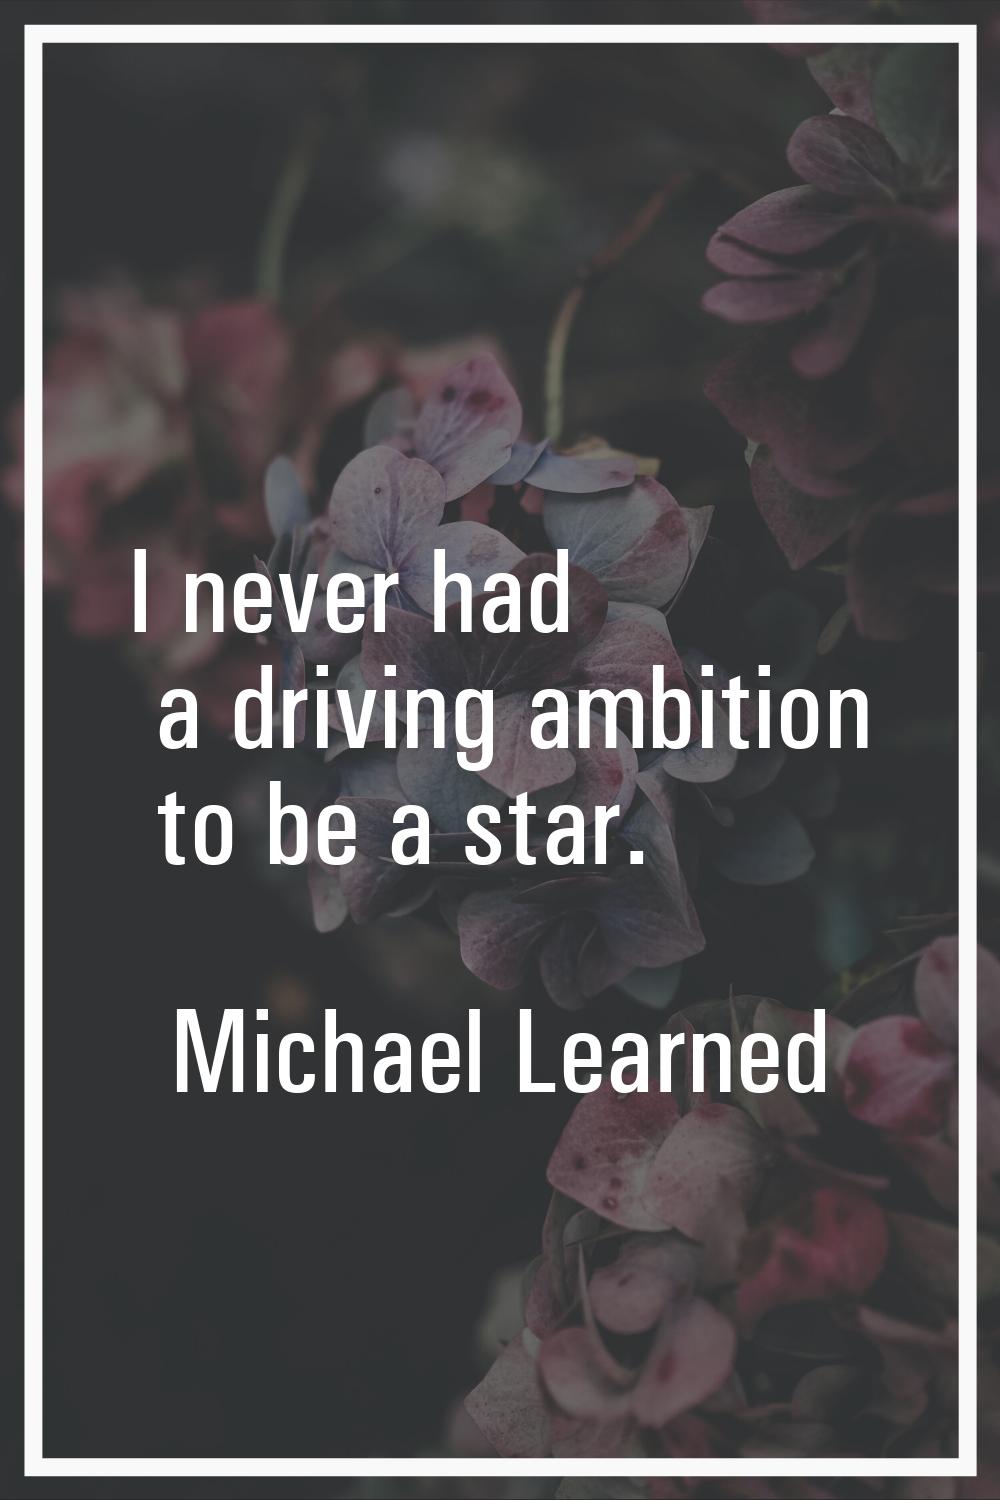 I never had a driving ambition to be a star.